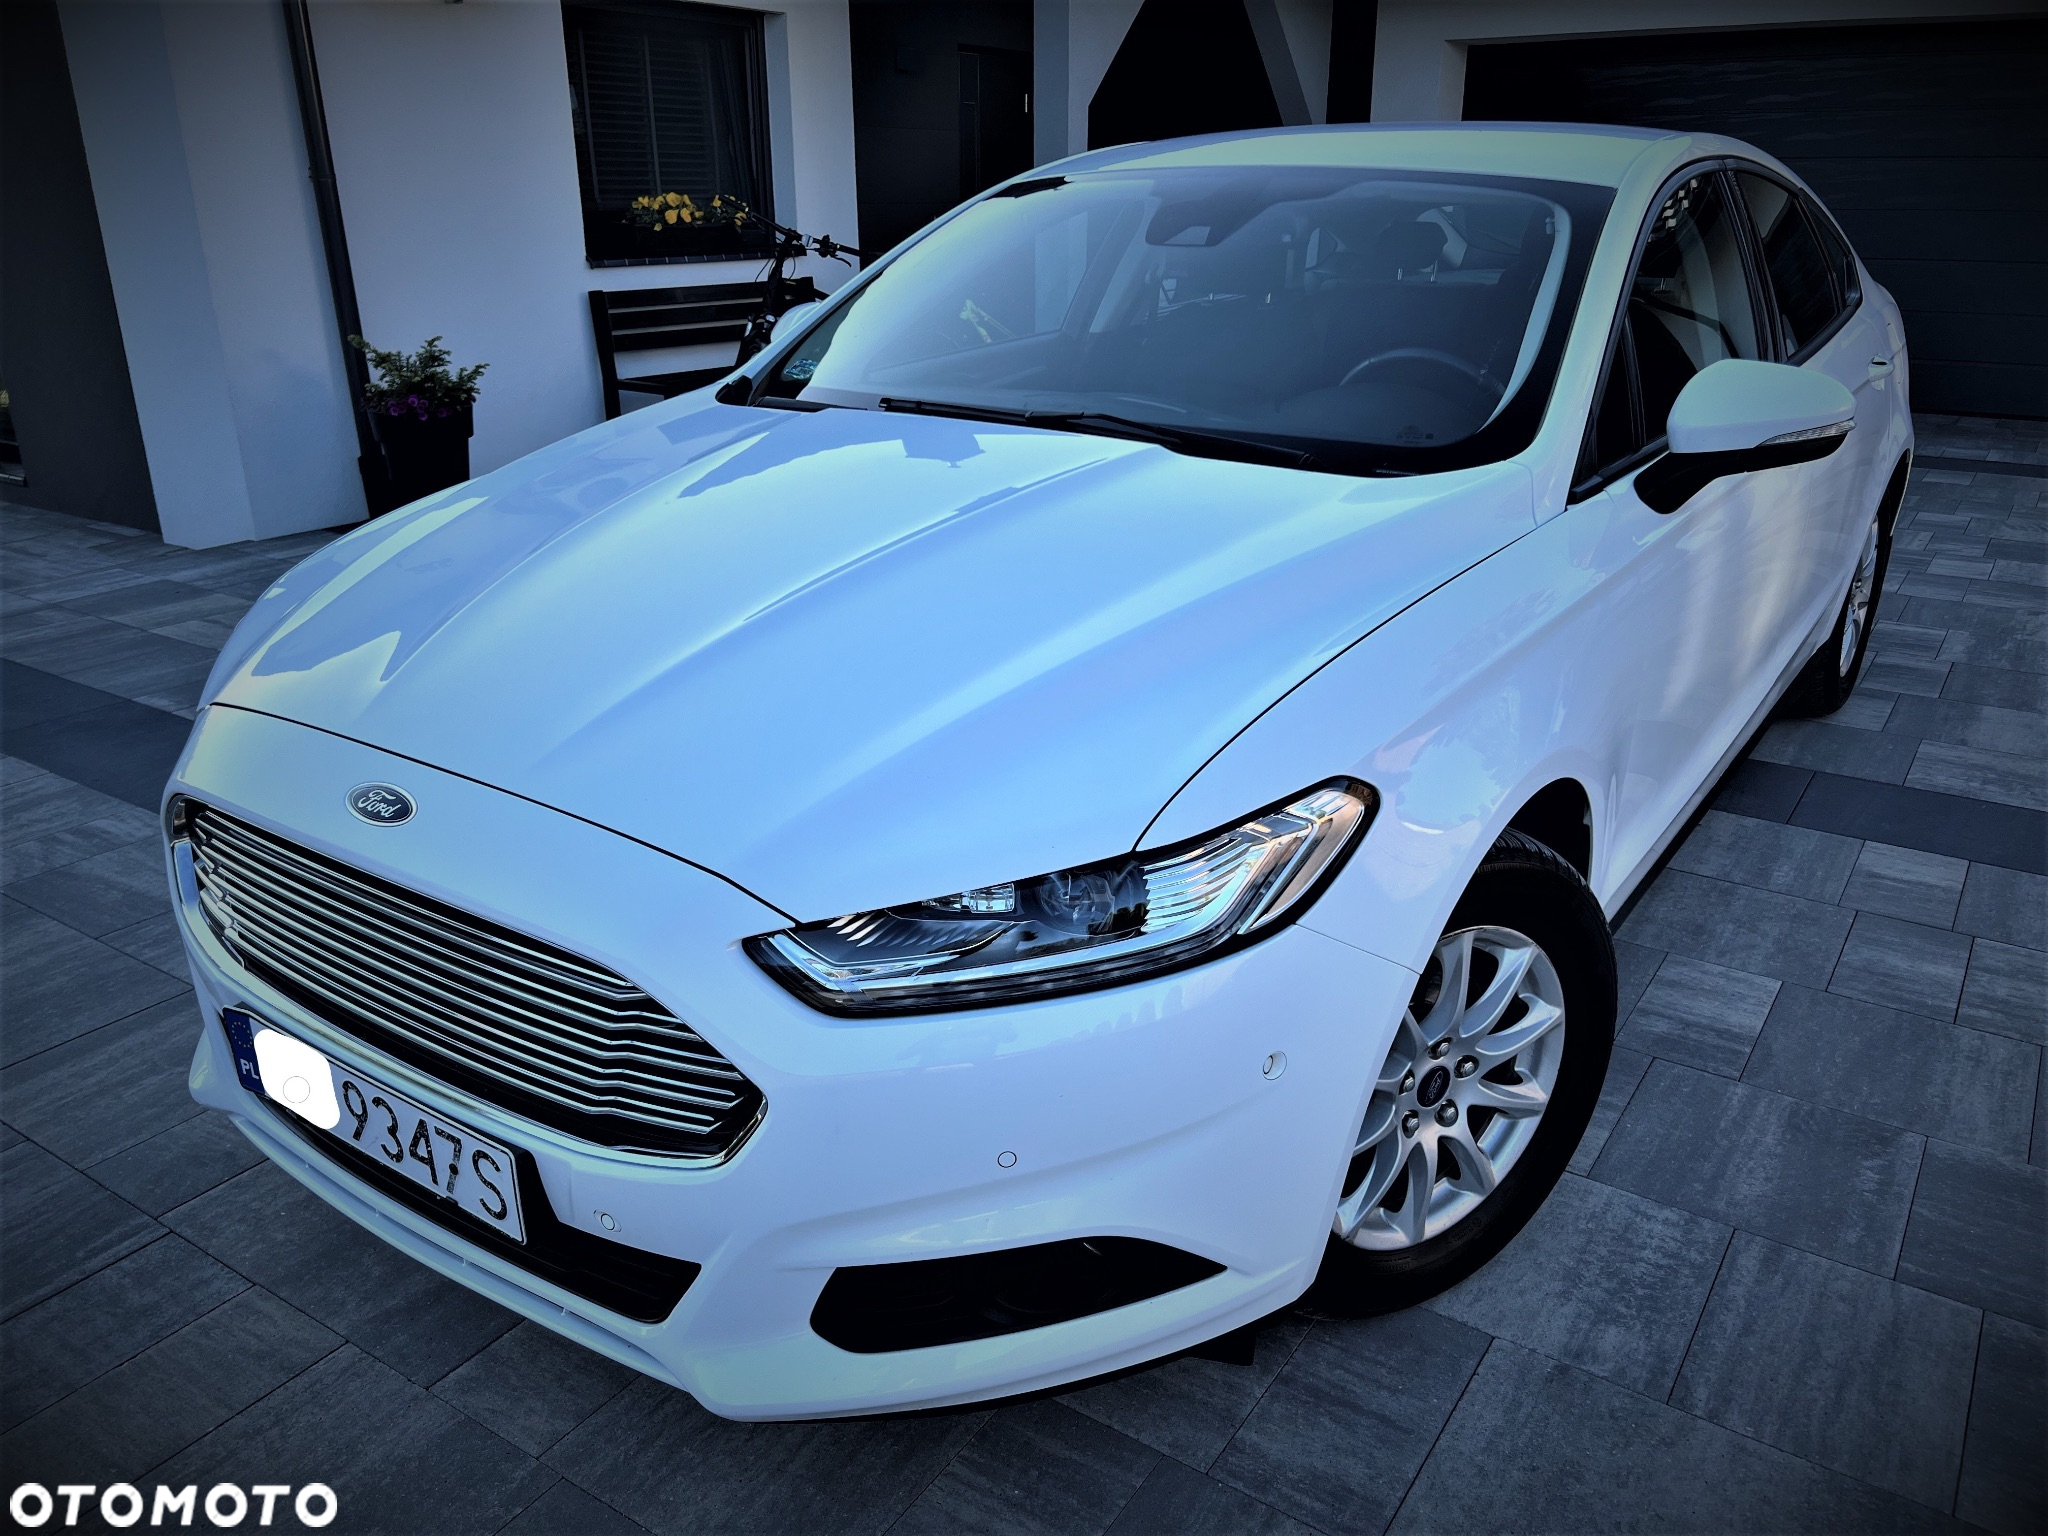 Ford Mondeo 2.0 TDCi Gold X (Trend) - 15